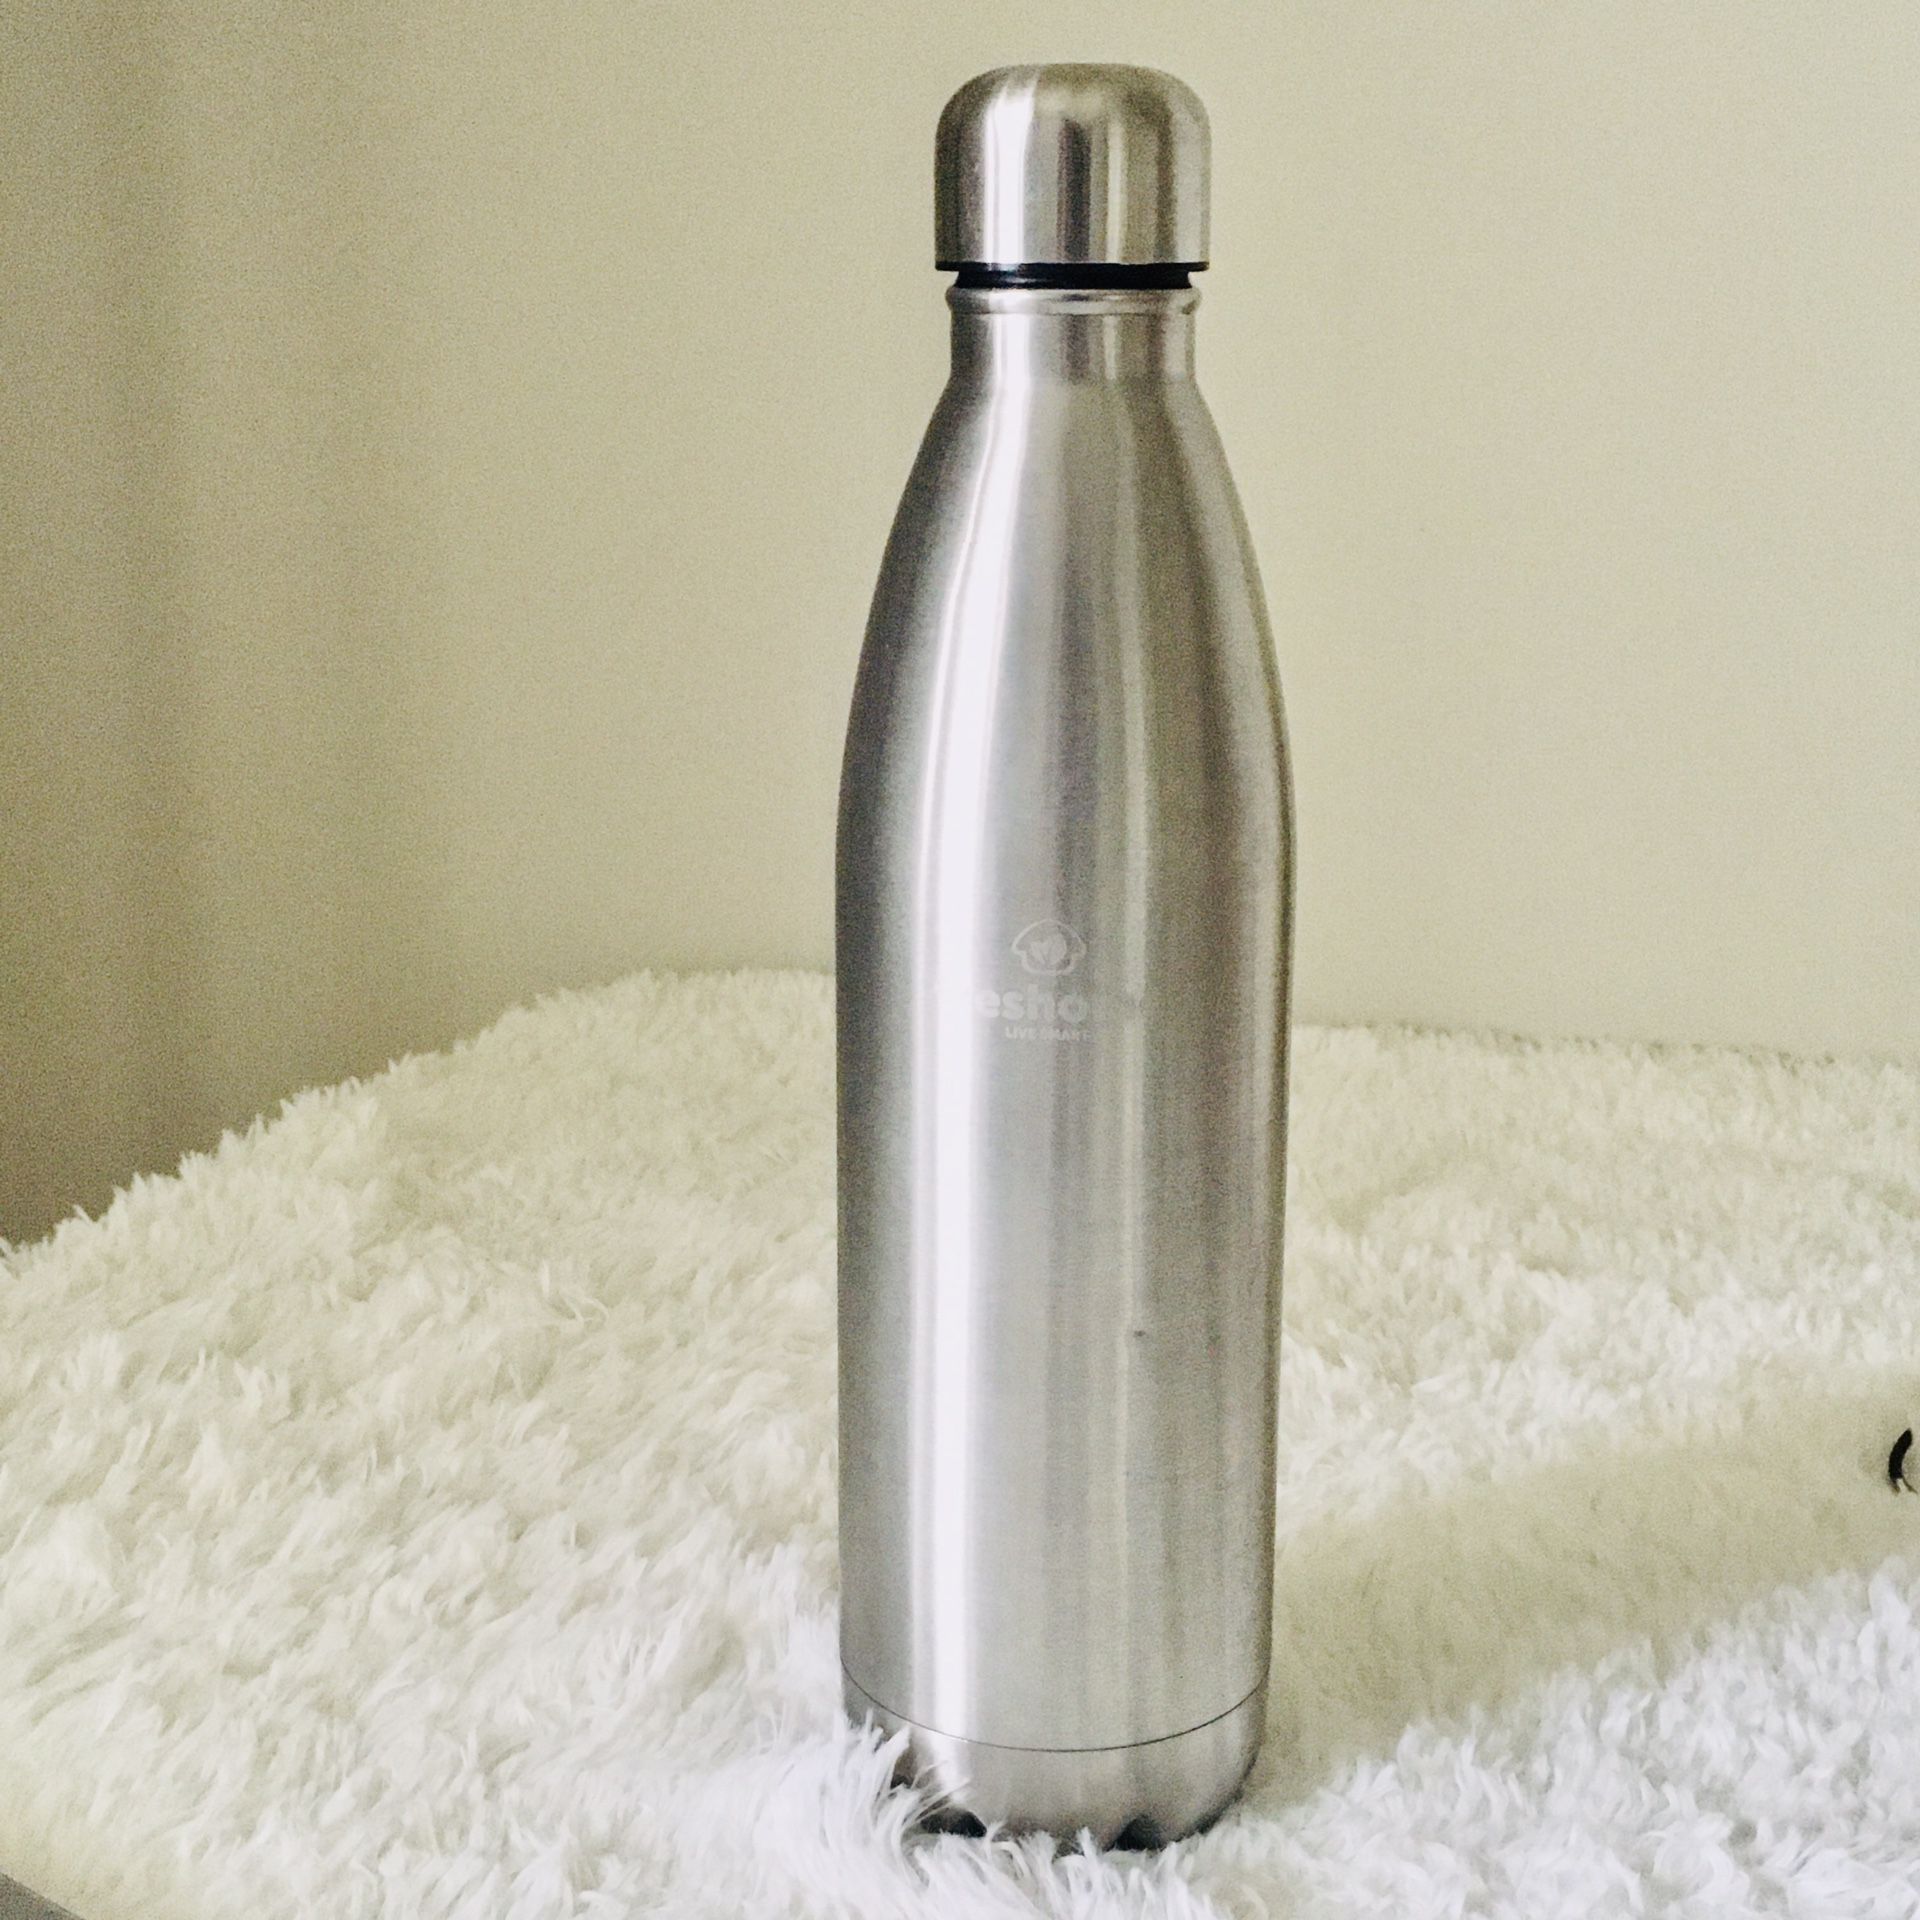 Stainless steel water bottle 36oz/1 liter pre-owned